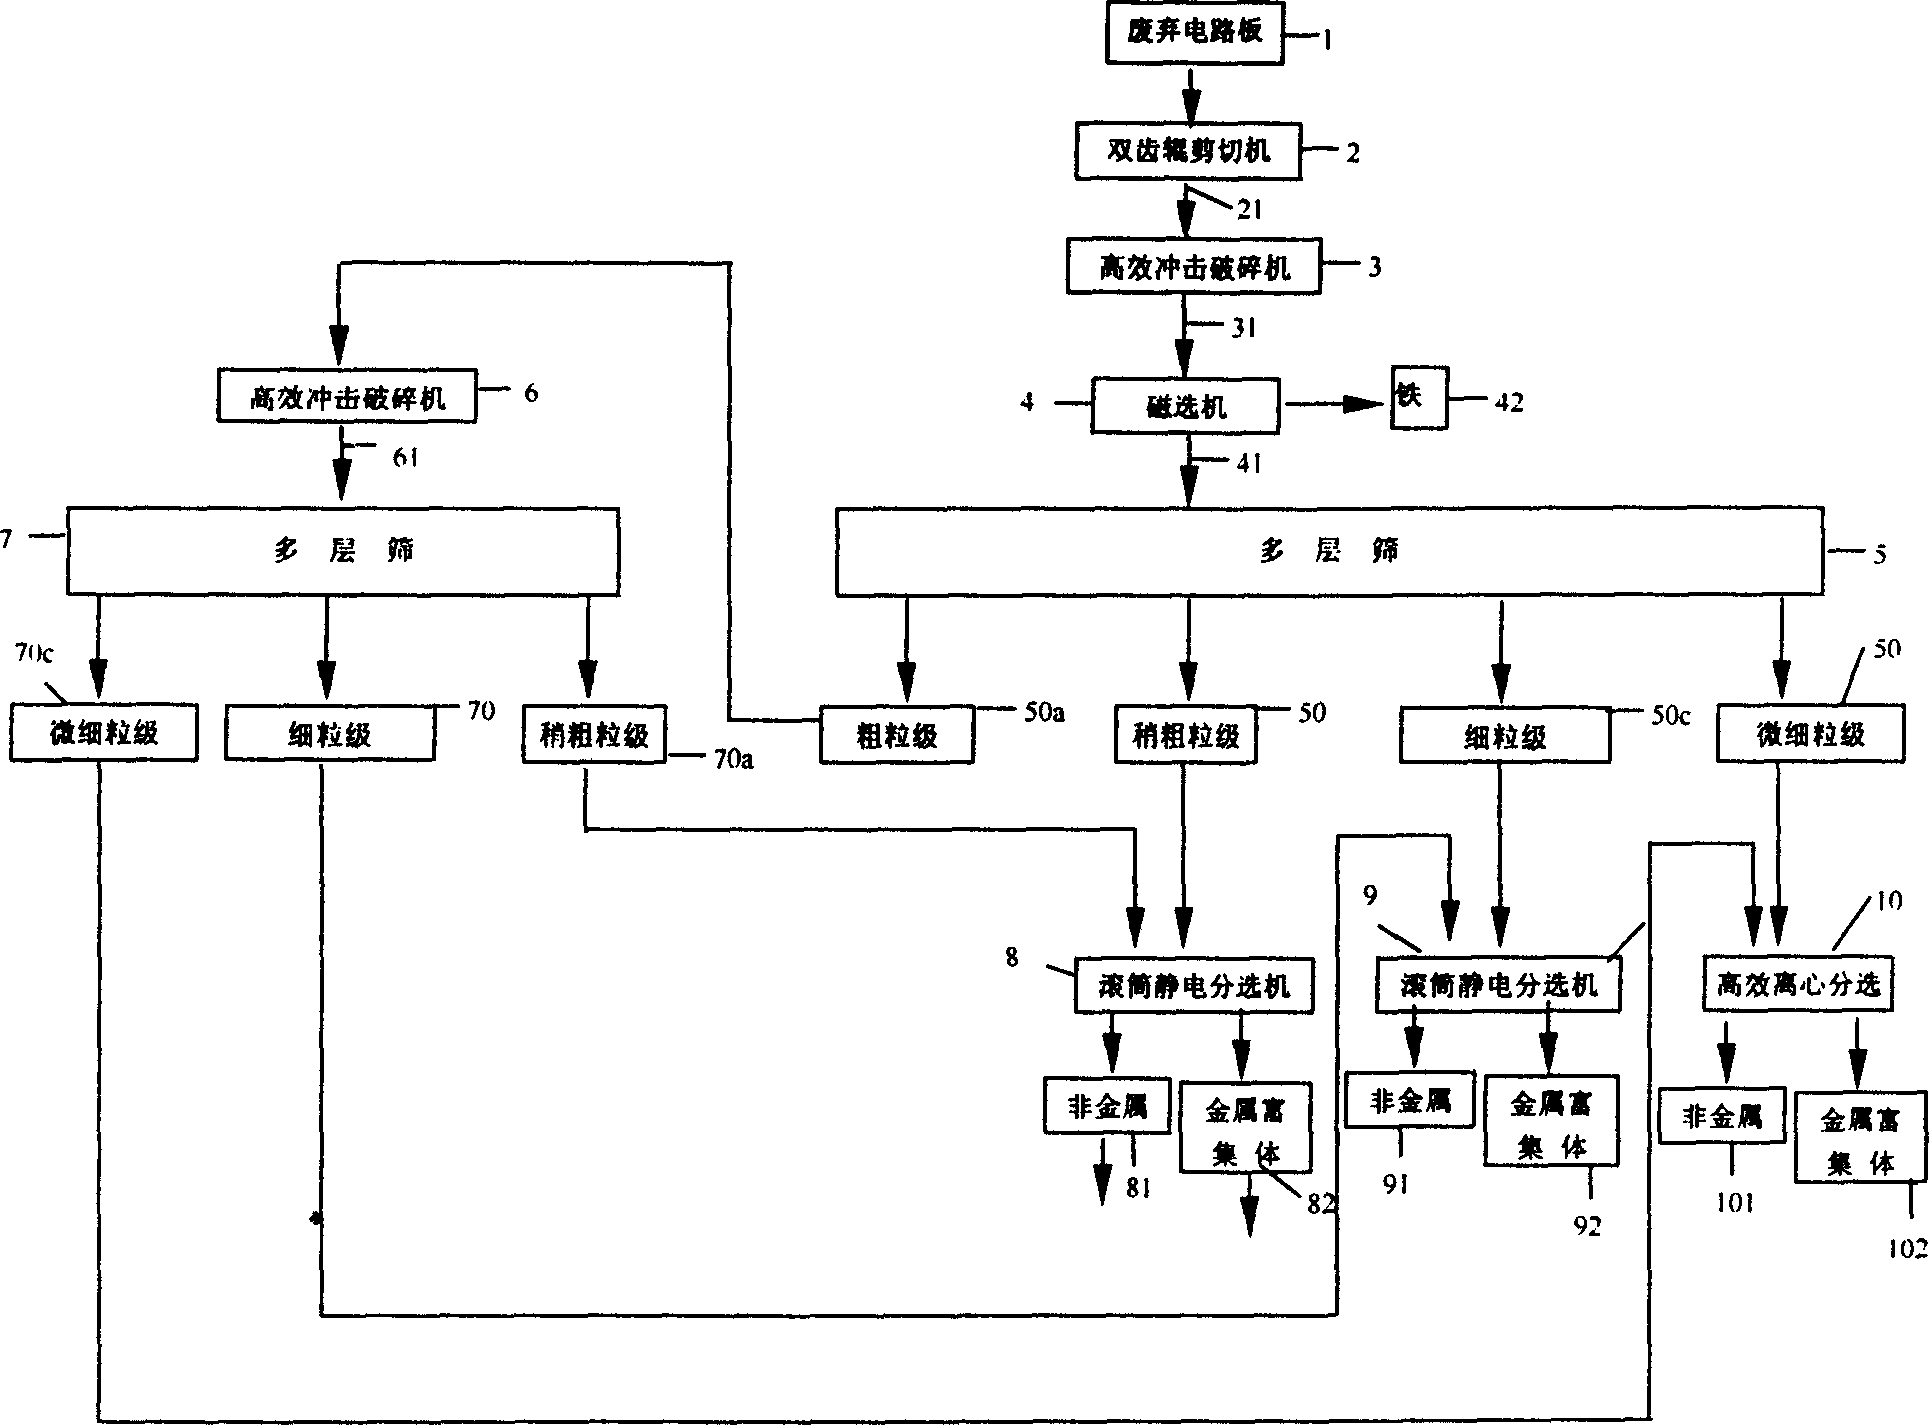 Techhnique for reclaiming metal concentrate in obsolete PCB physically